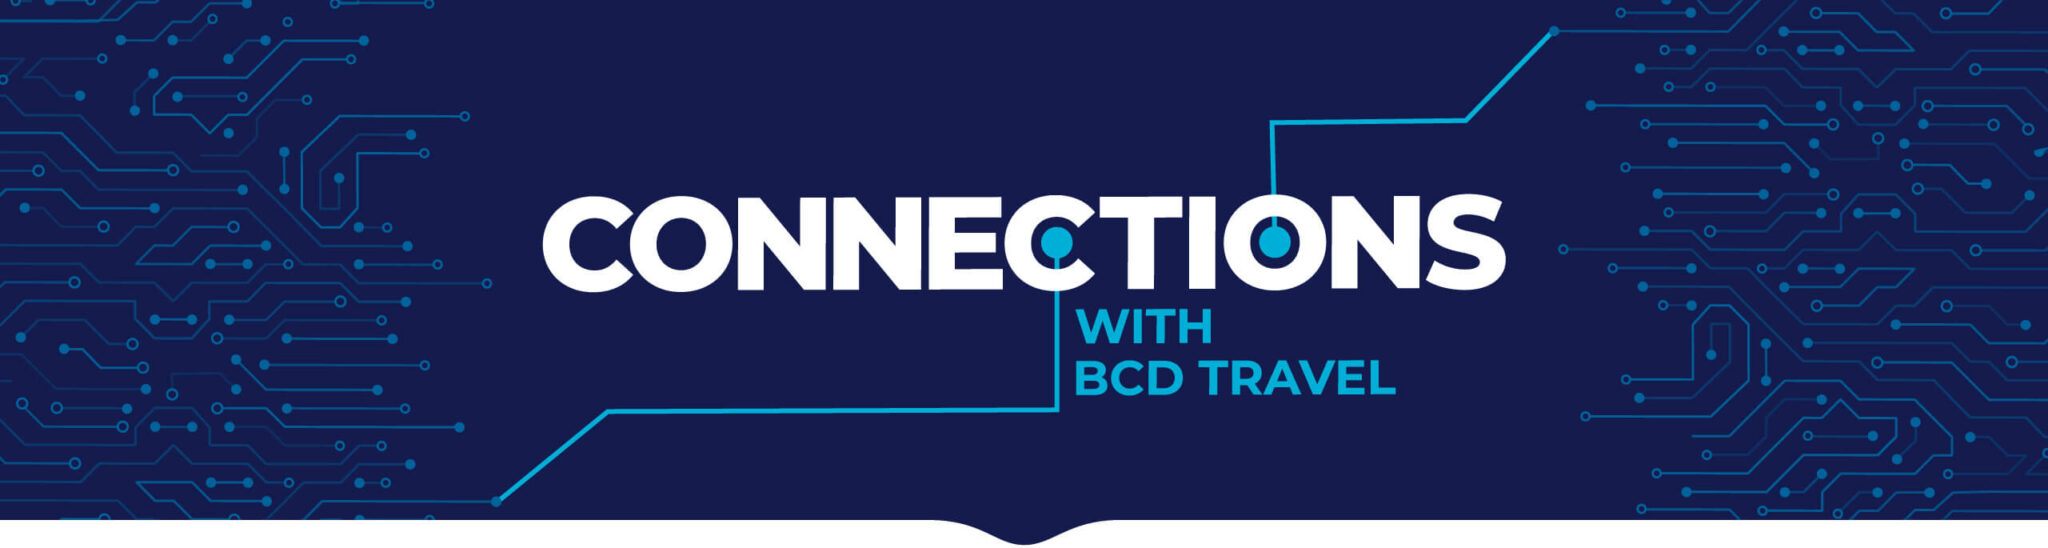 Connections BCD Travel